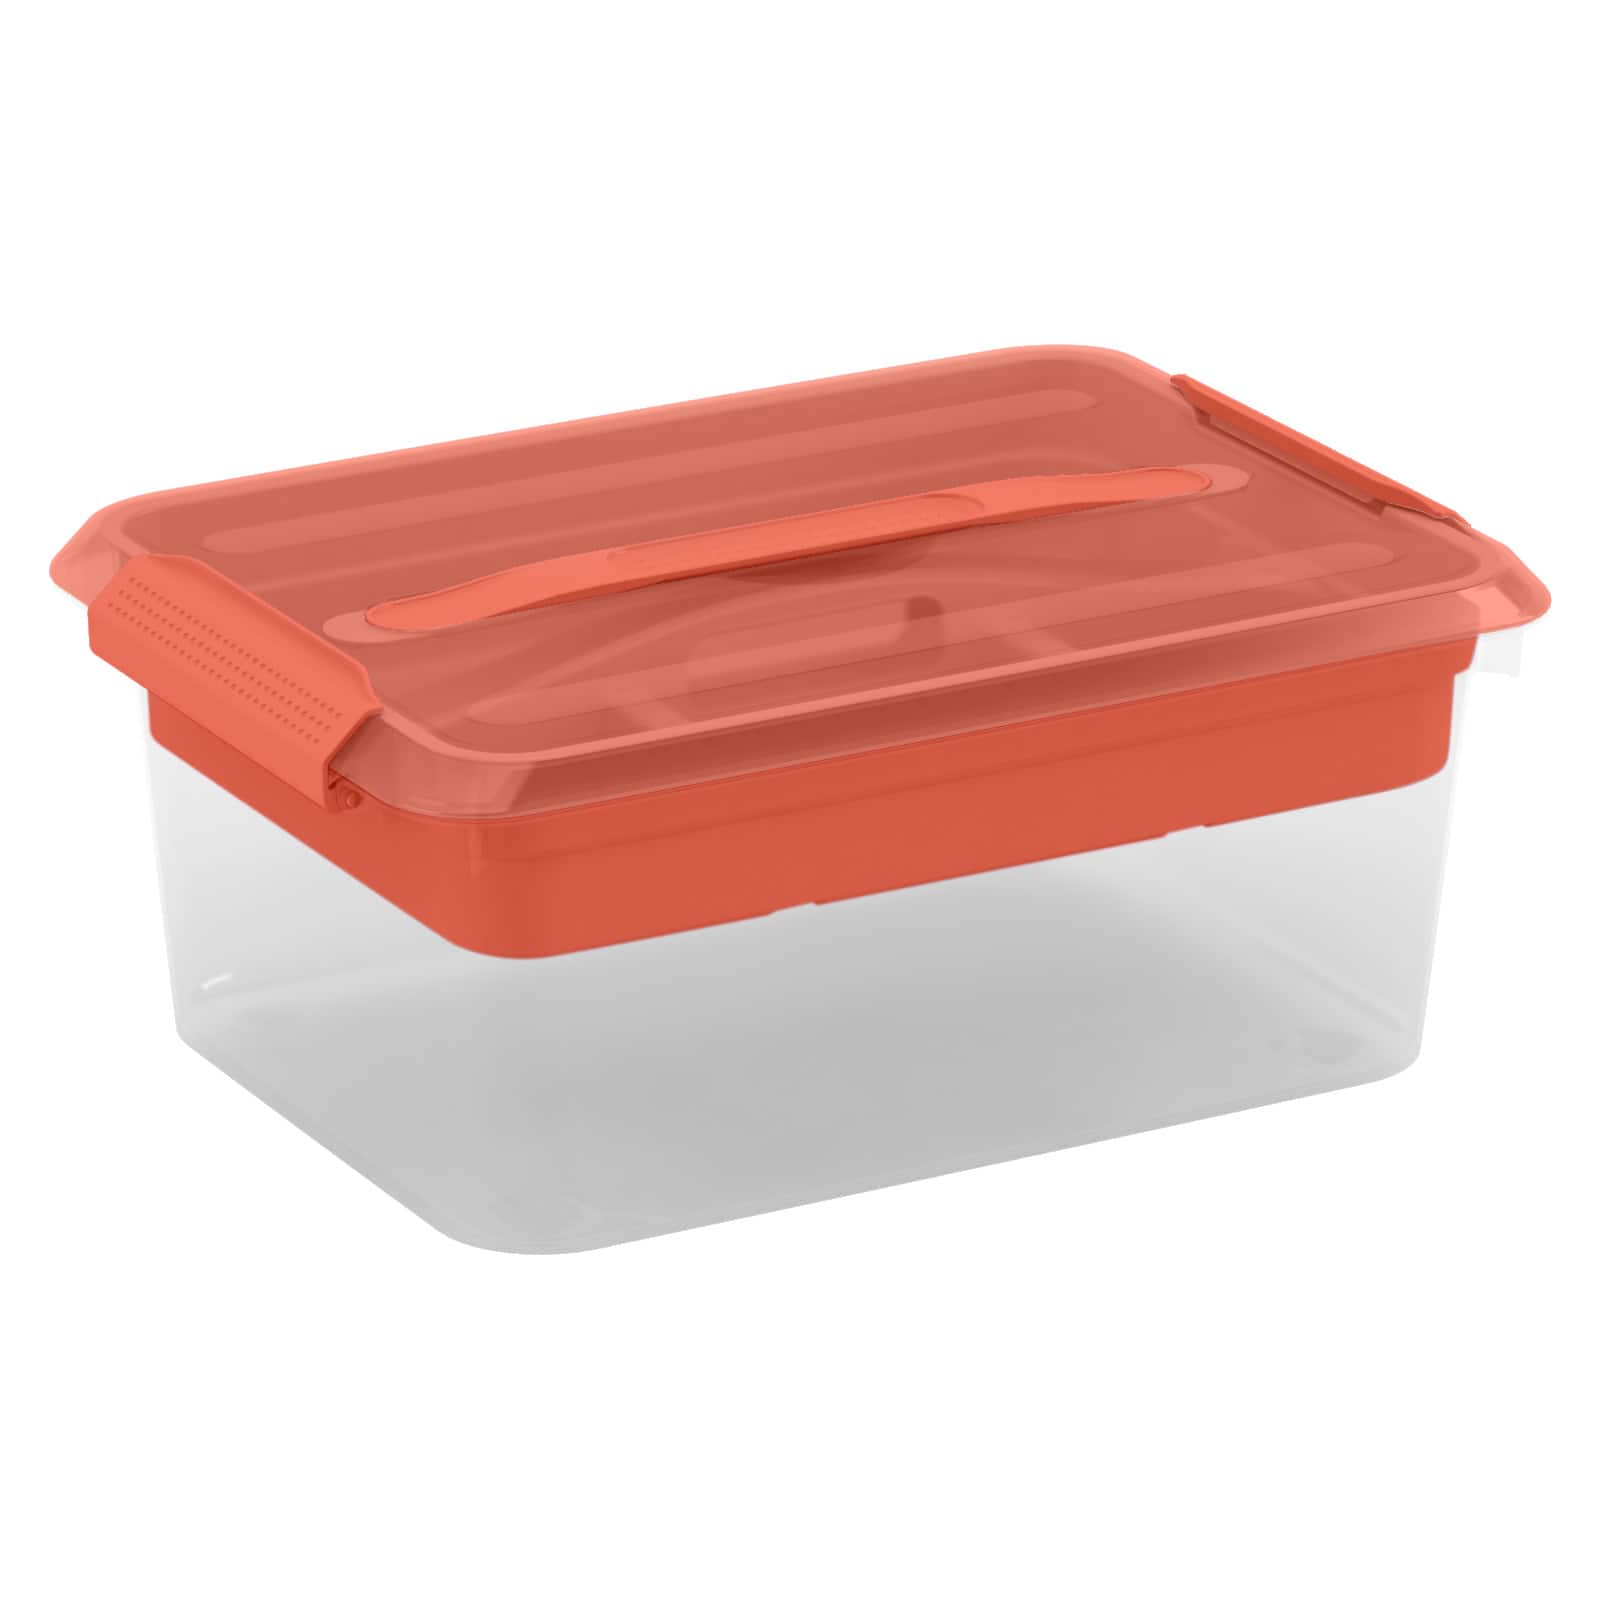 8 Pack: 14.5qt. Latchmate+ Storage Box with Tray by Simply Tidy